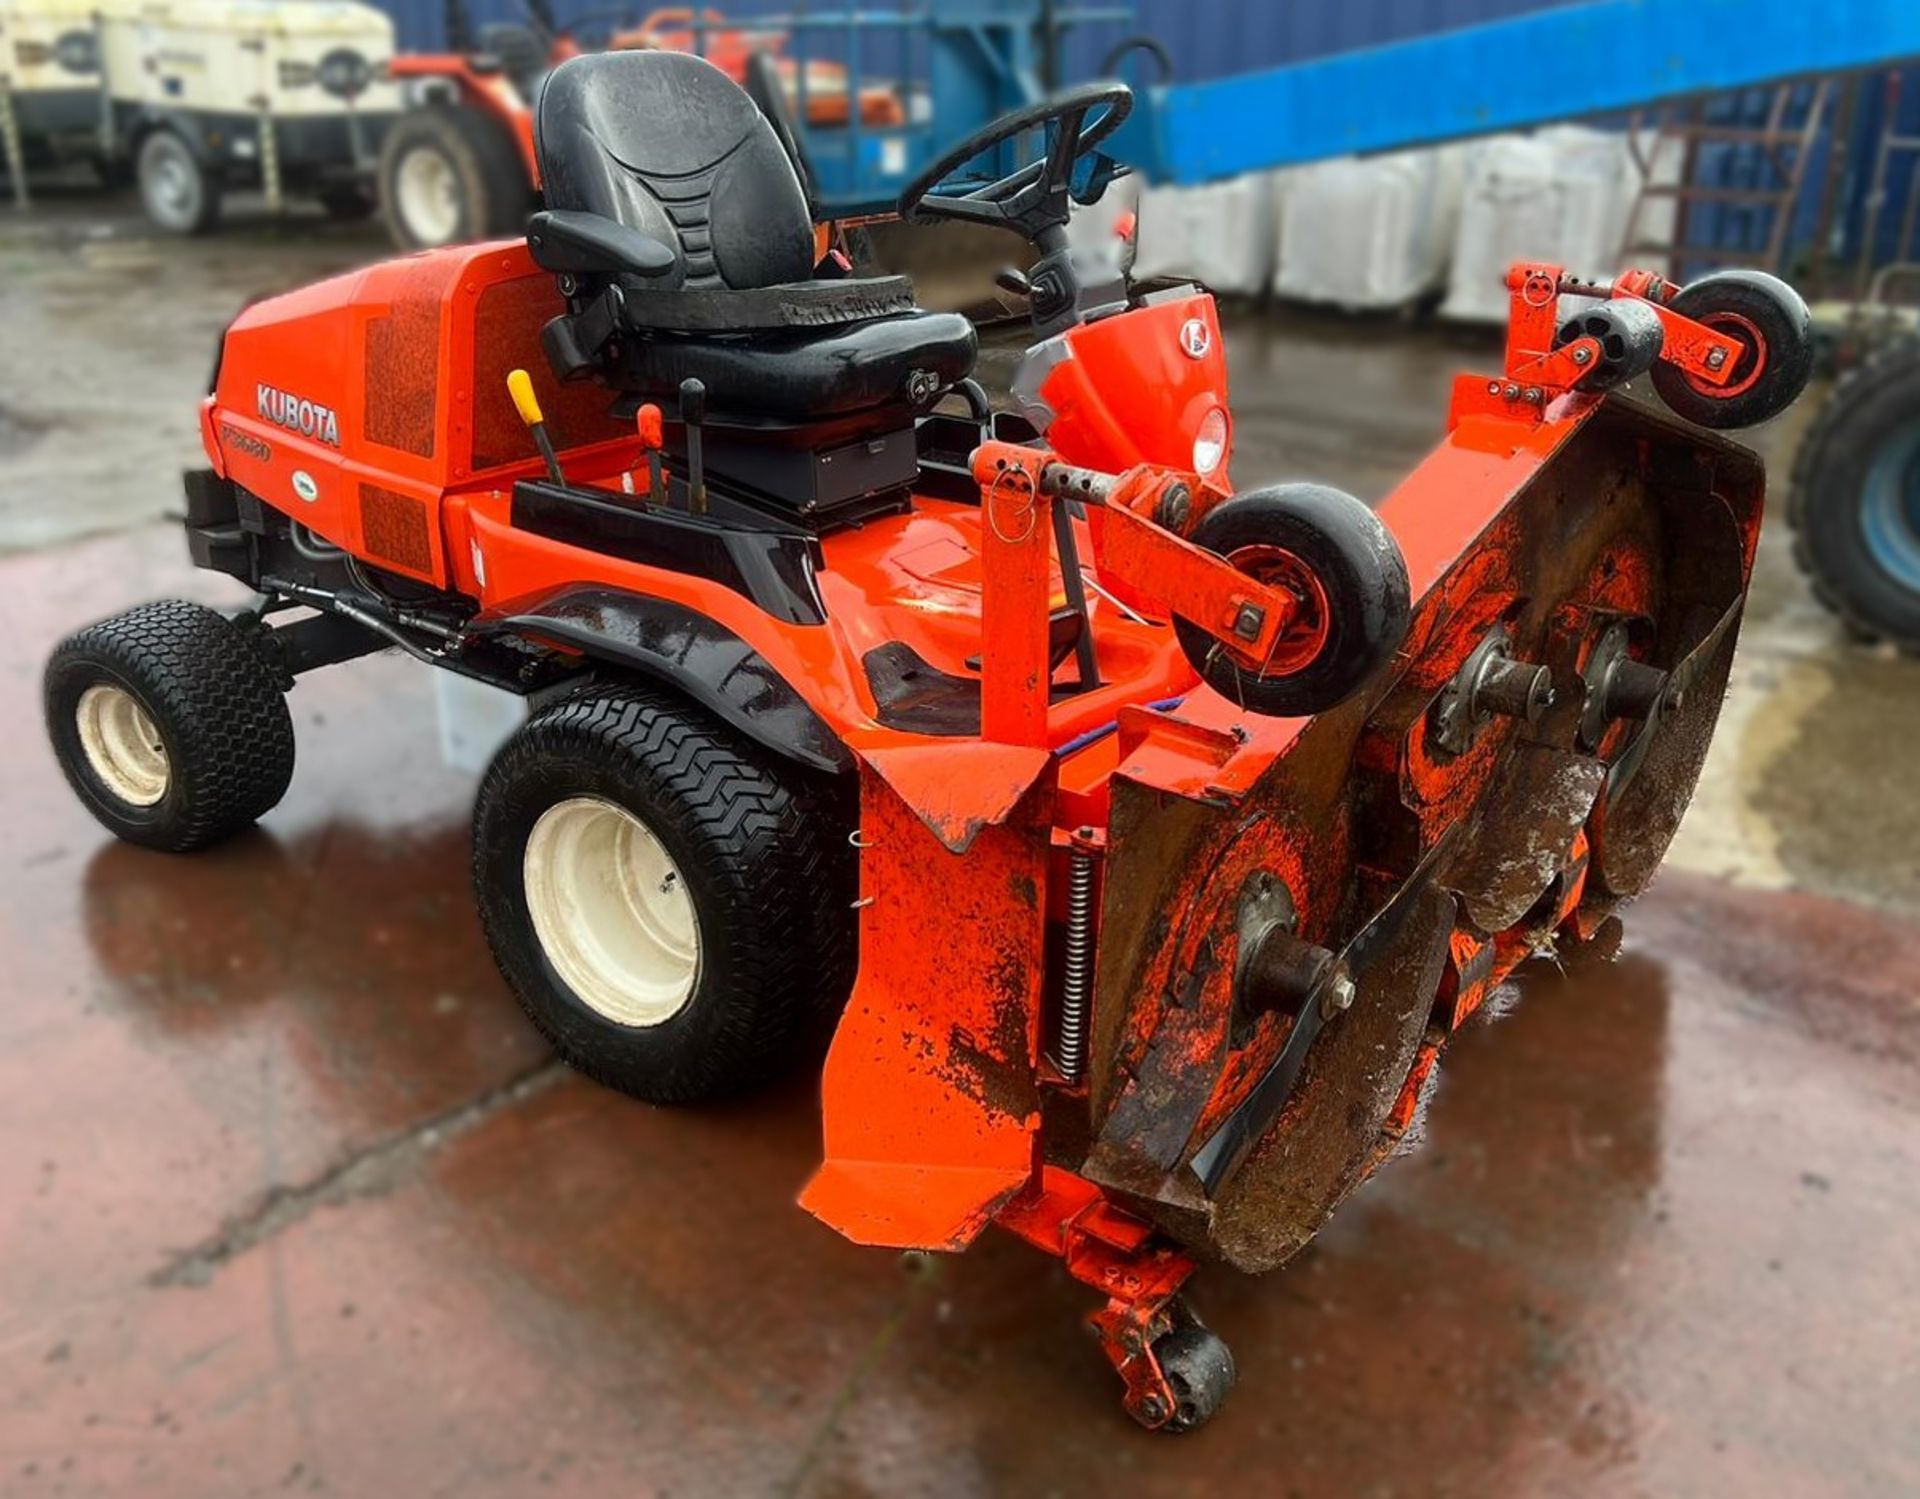 A Kubota F3680-EC 4WD Ride On Mower with 3 blade Mower Deck (one blade missing) and towing hitch,